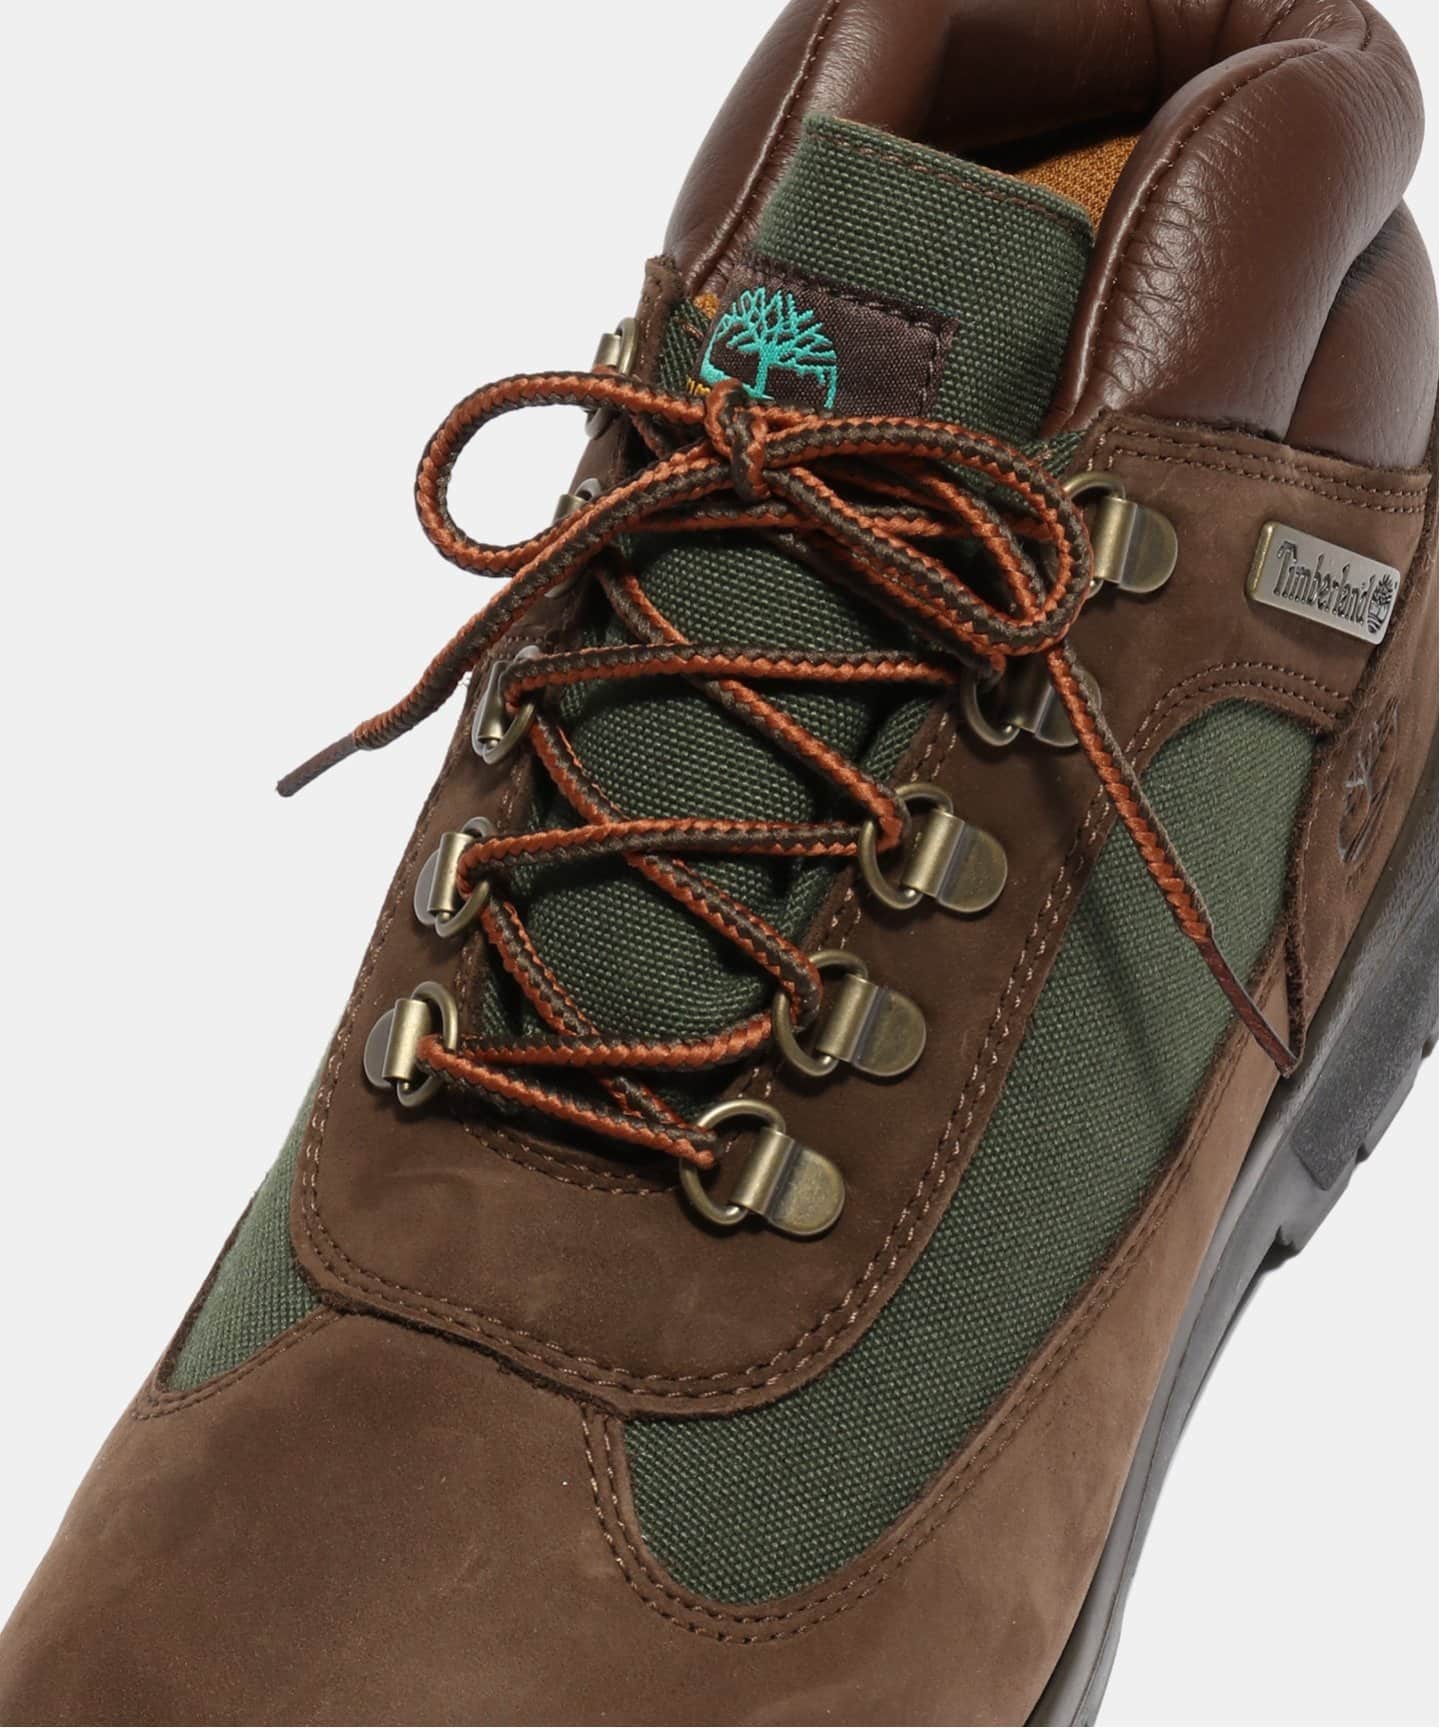 【Timberland / ティンバーランド】Field Boot F/L WP A18A6